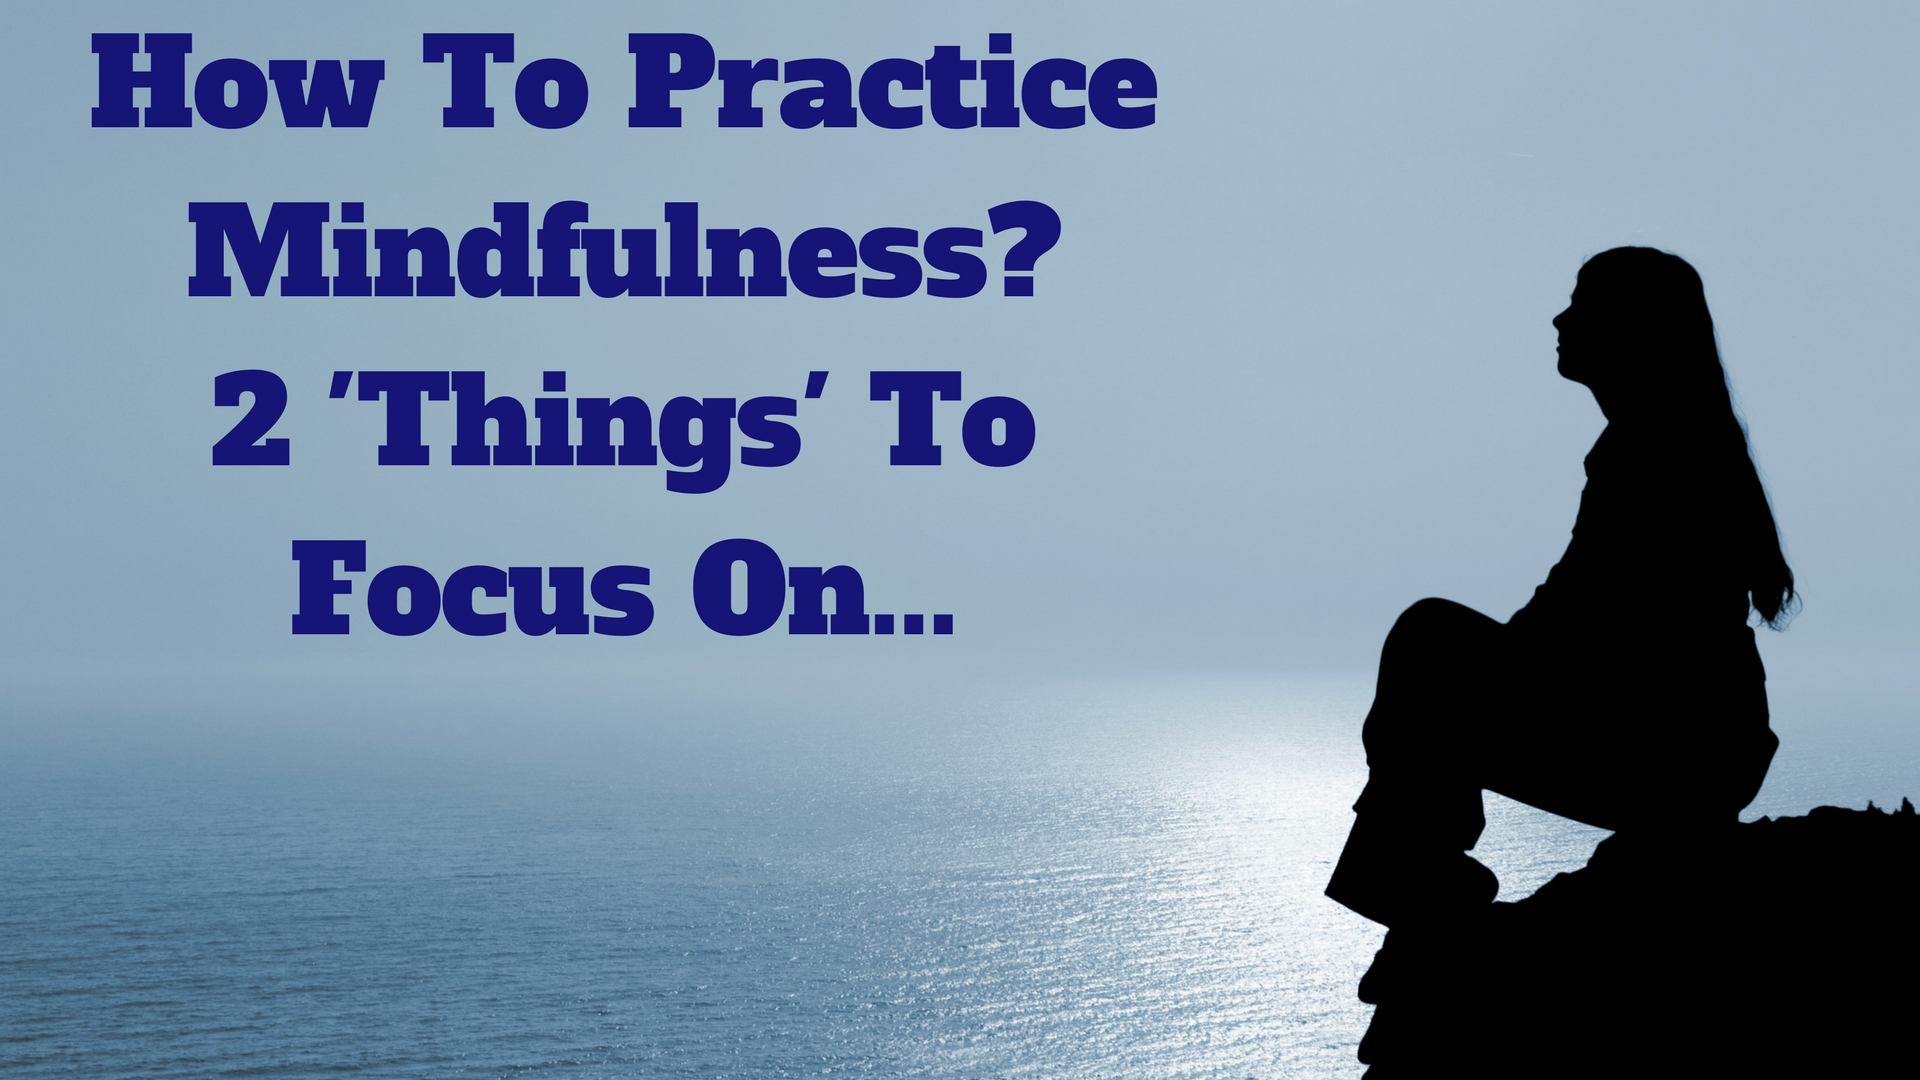 How To Practice Mindfulness